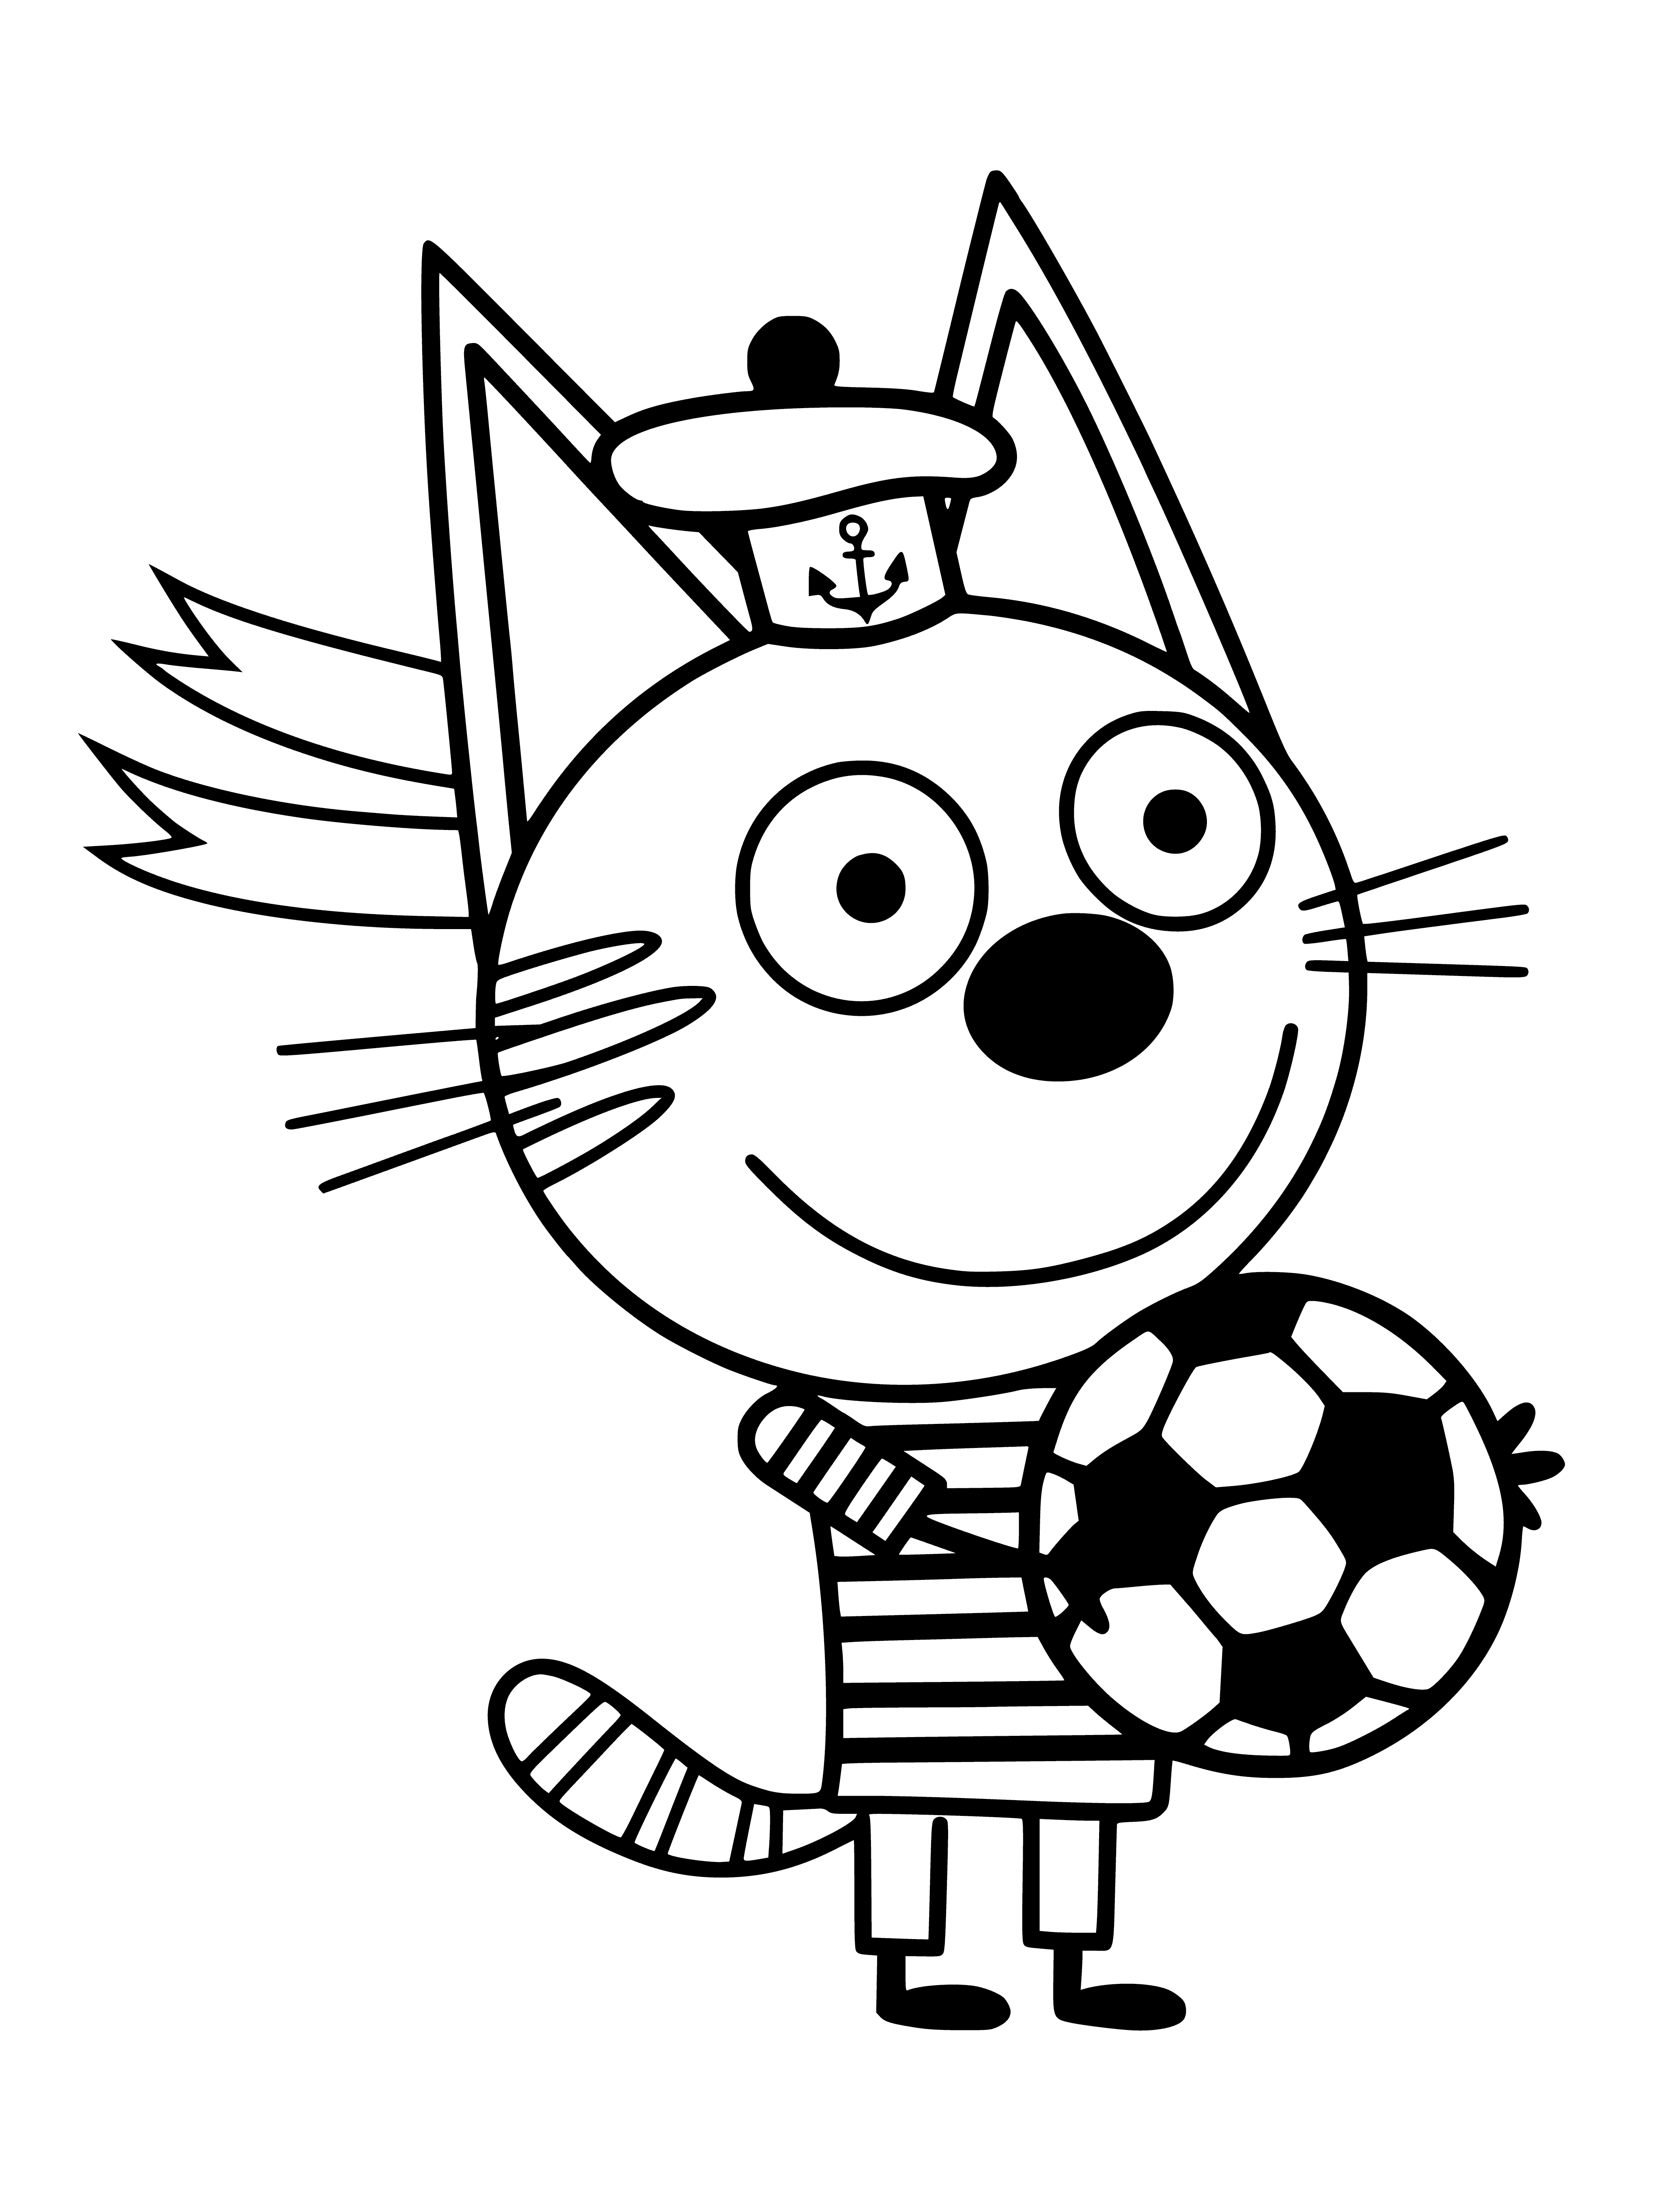 coloring page: Three cats: Cookie (tan/white, black nose), Tan/White (black nose), All Black (sitting behind soccer ball).